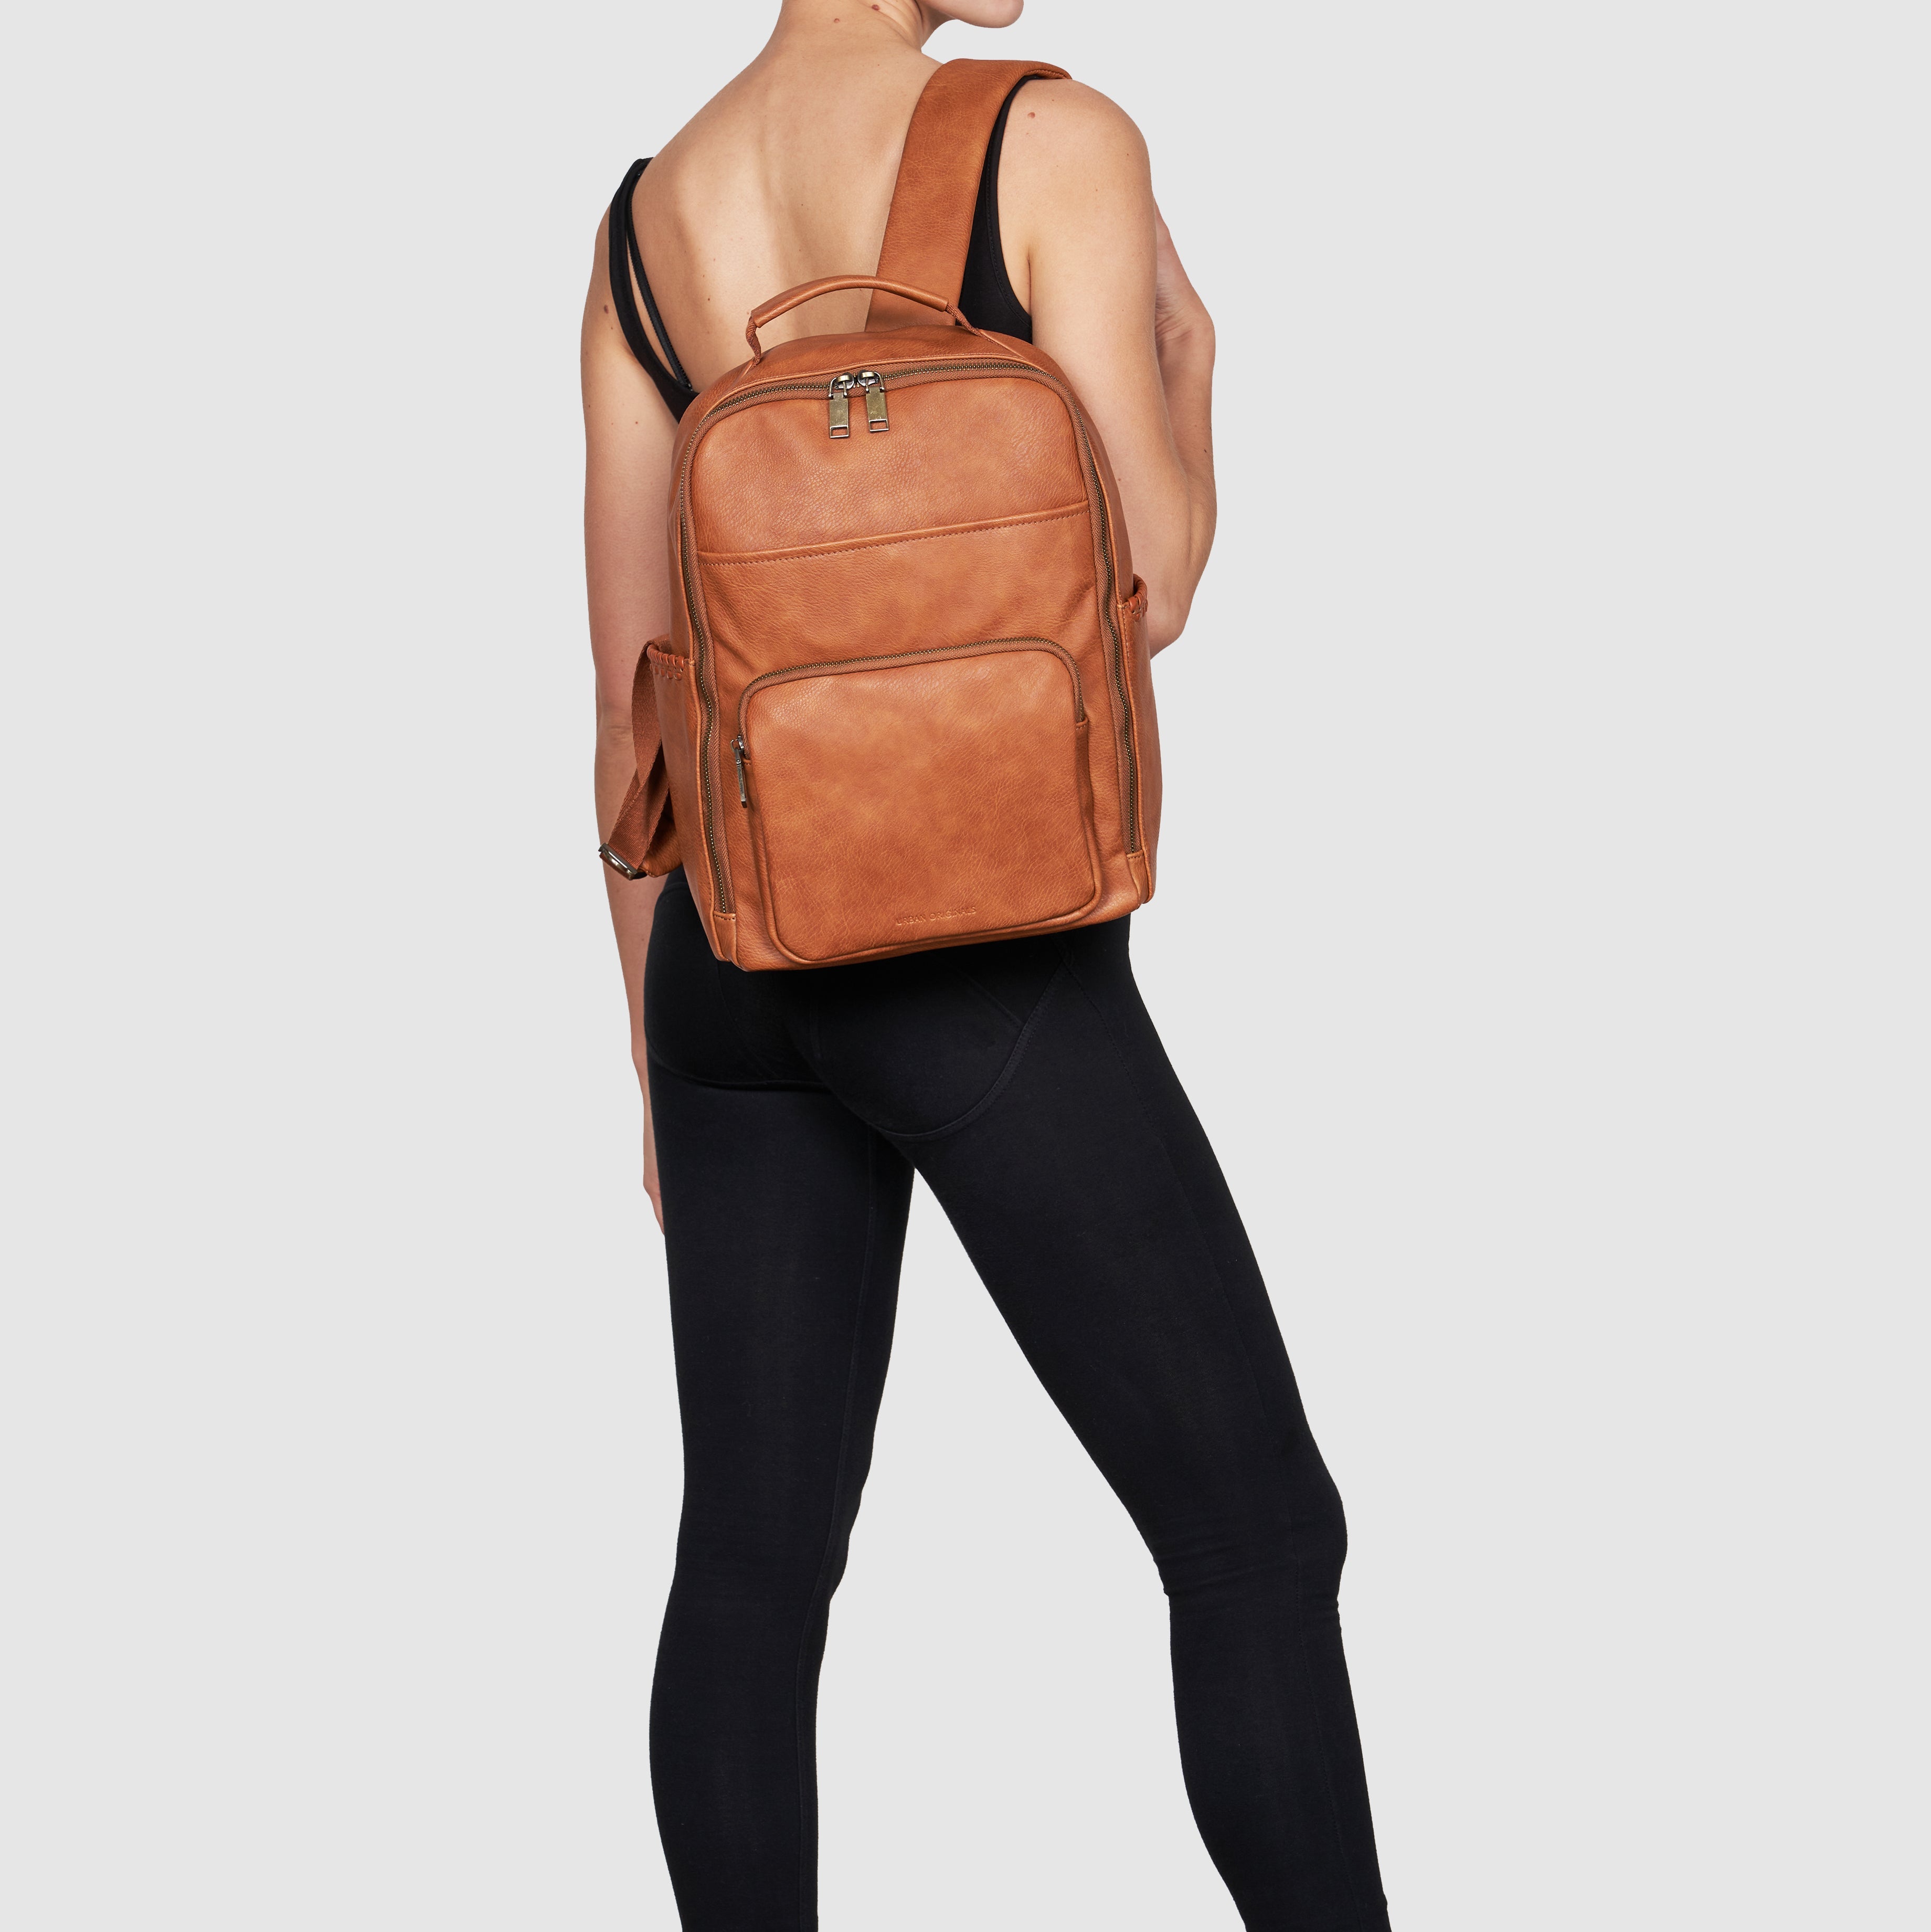 Astra Backpack - Tan